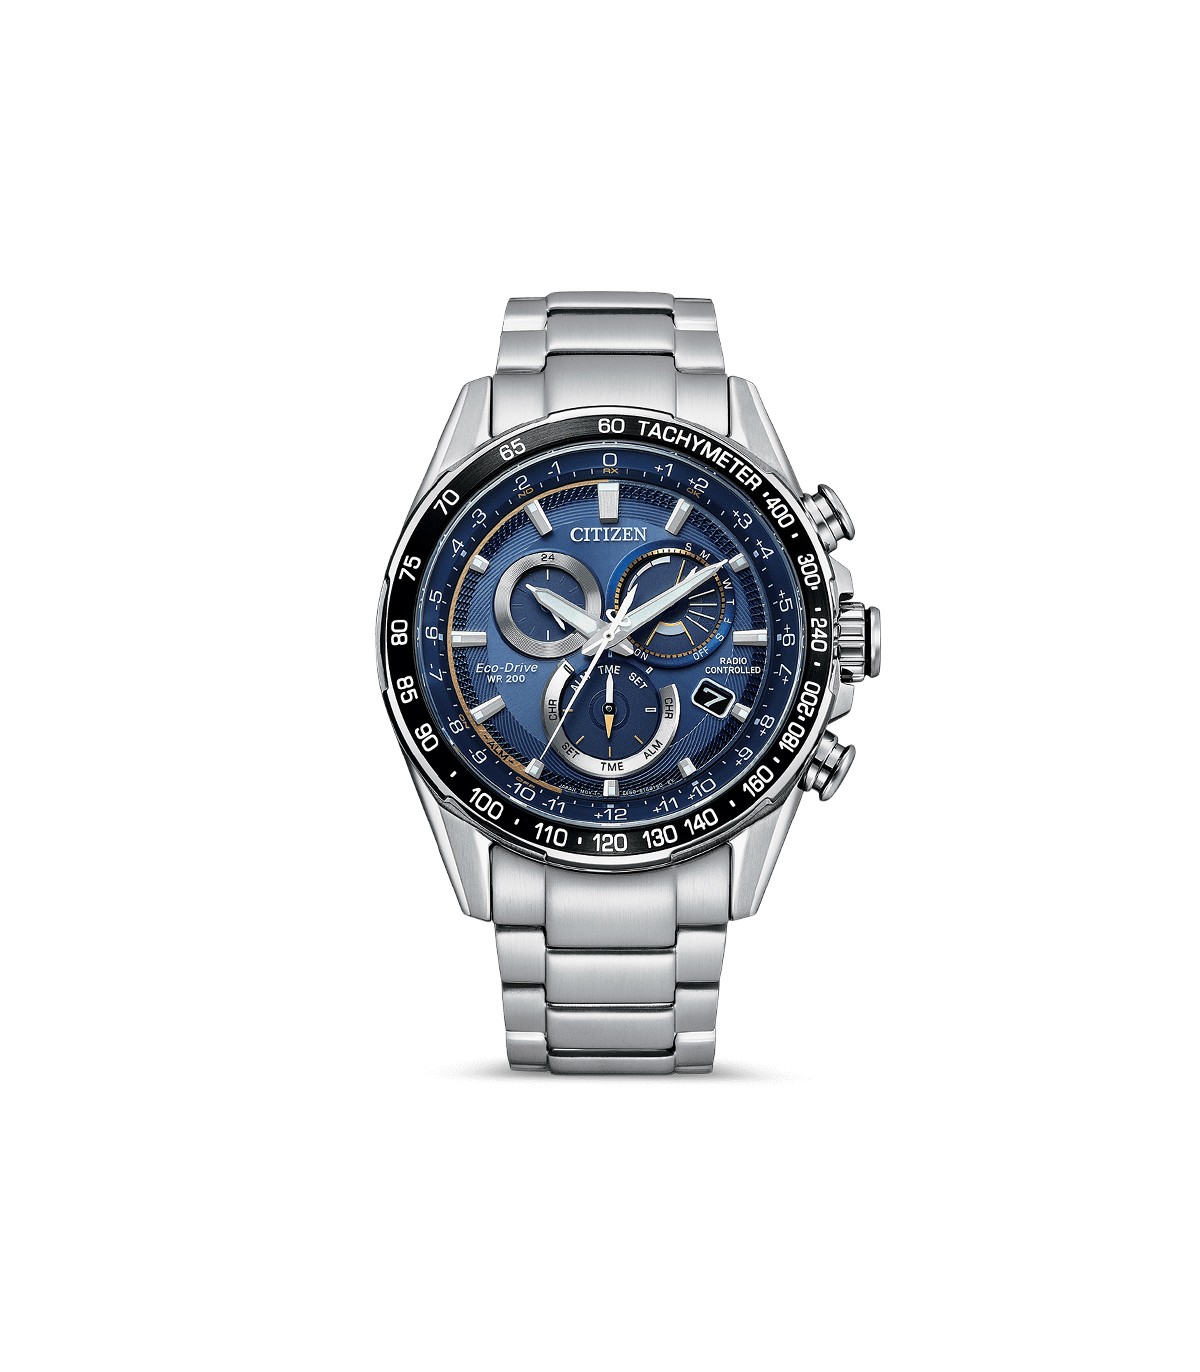 Citizen Men's Watch - Radio Controlled Eco-Drive 43mm Blue